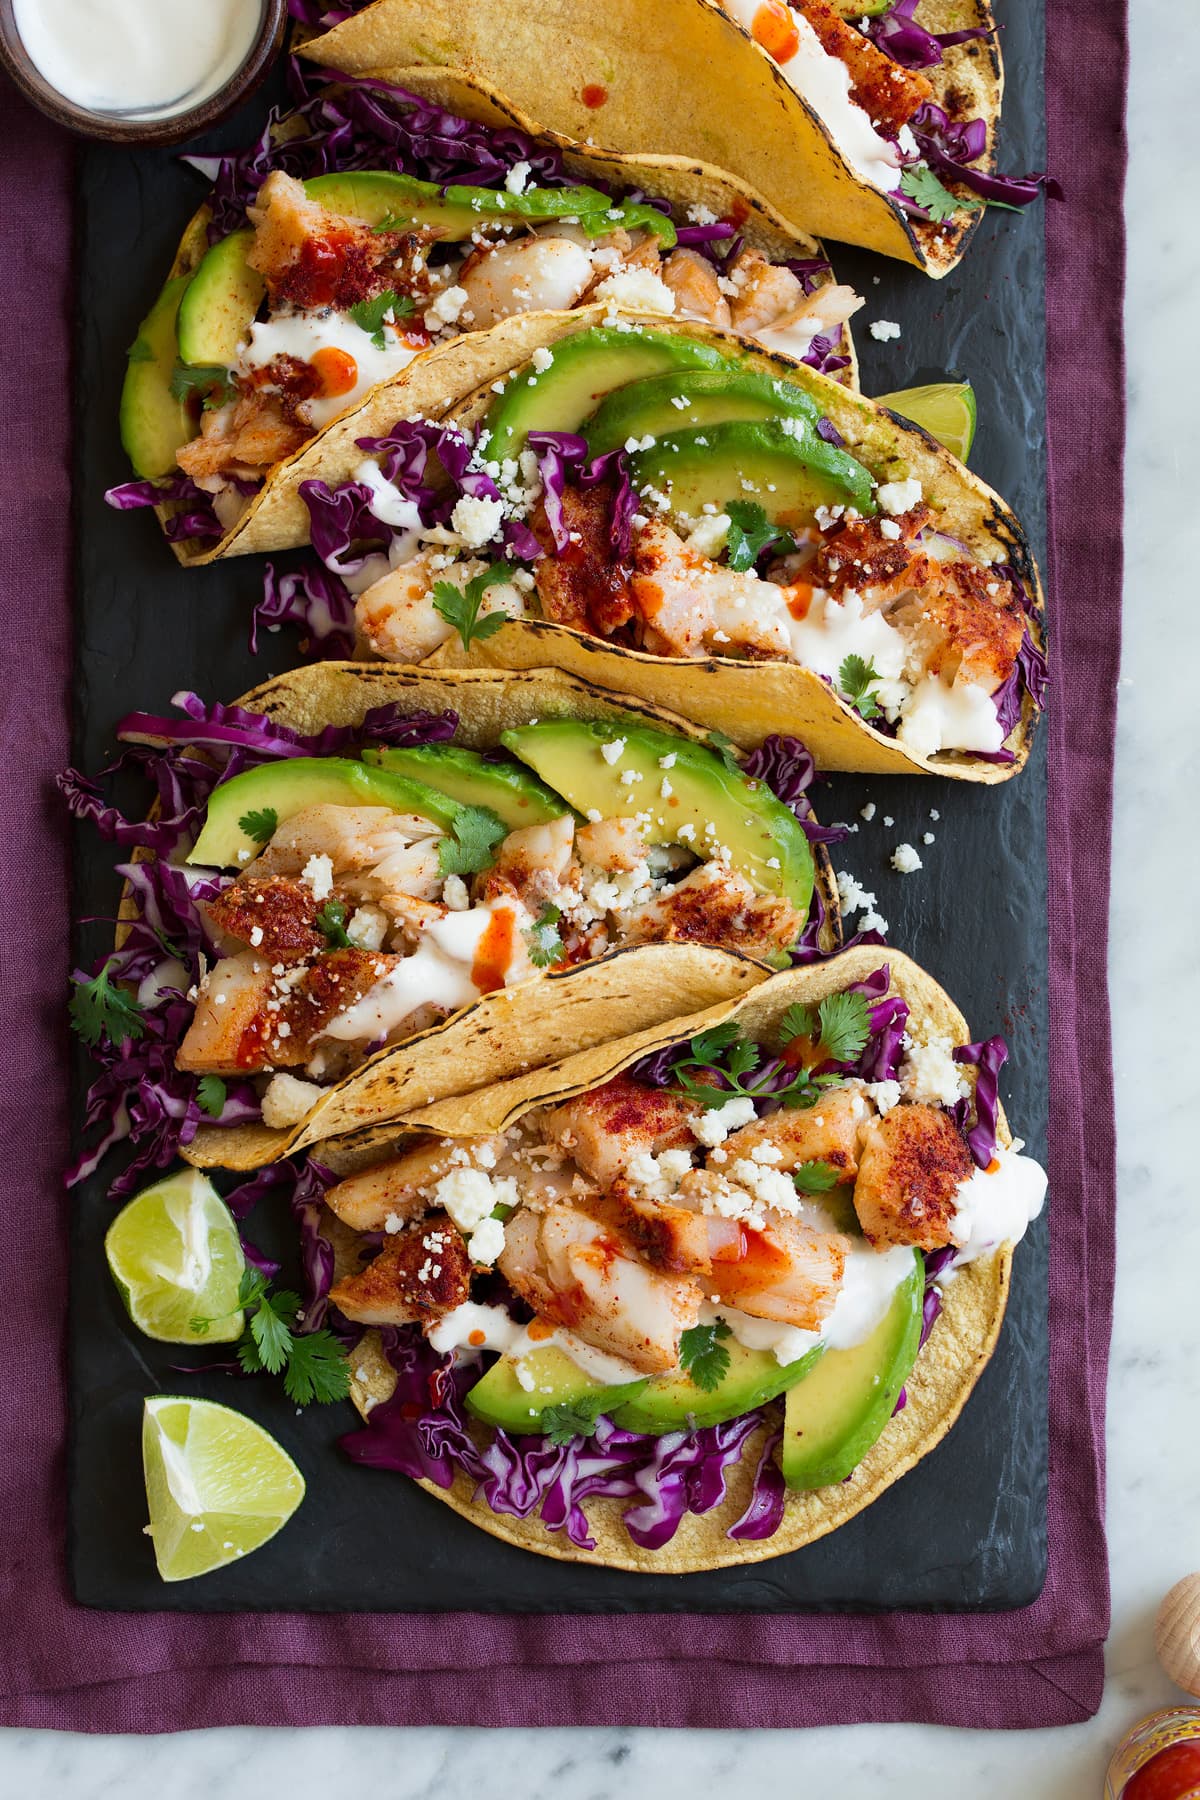 Tacos fish Tequila Lime